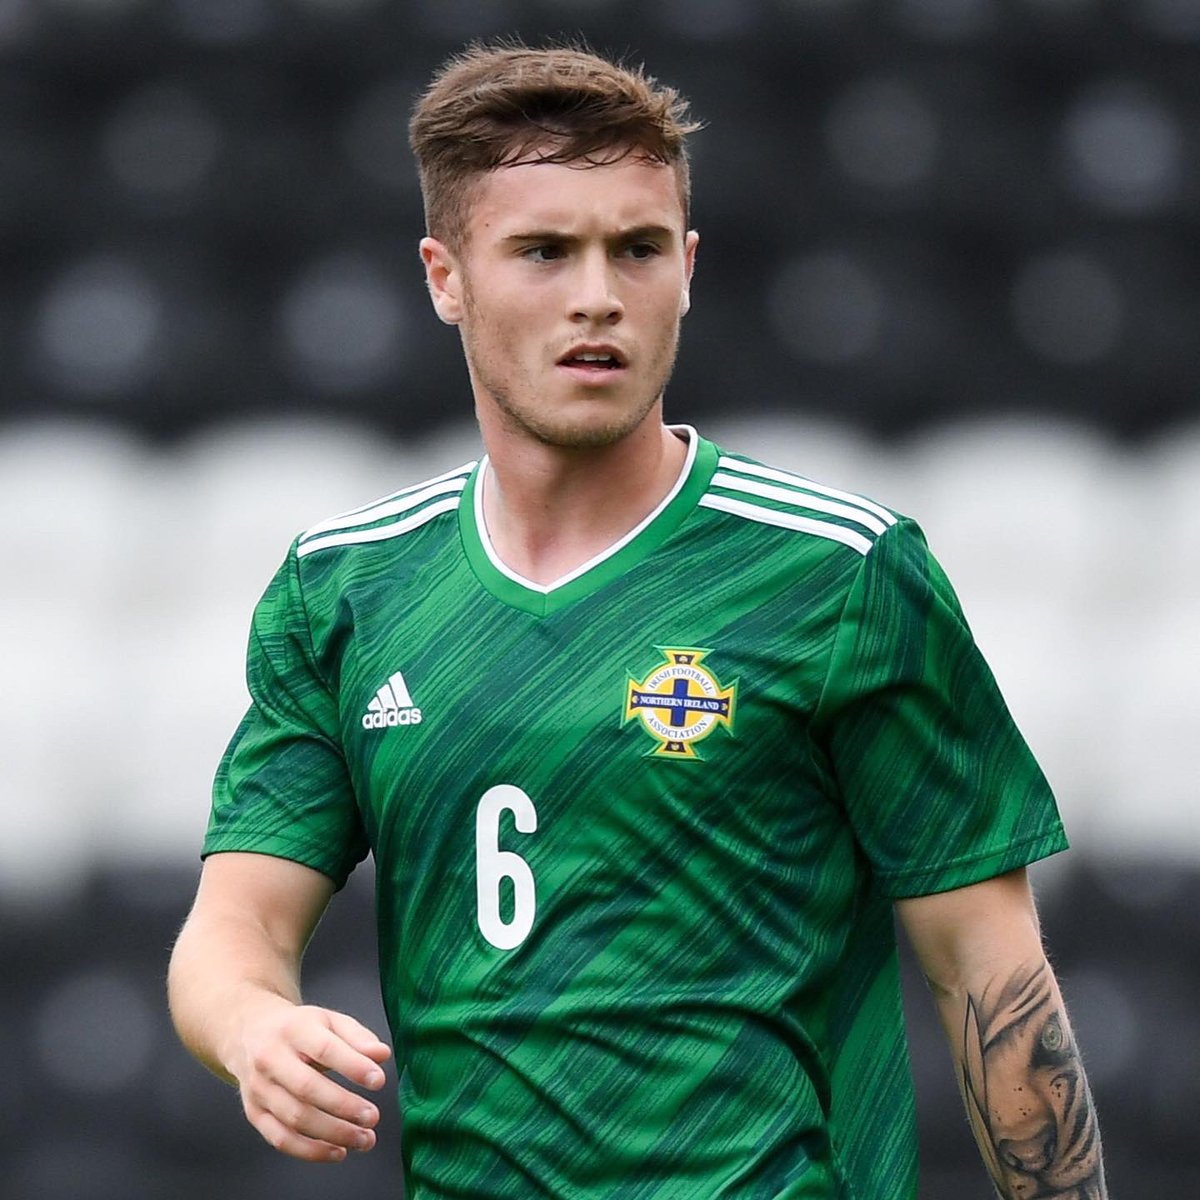 Charlie Mccan 🇮🇪

Recently relegated with Forrest Green, I’d expect he’d  be hoping to find a new home next season. 

Having personally seen him play a few times over his young career I believe he’s still yet to show his true potential. 

Having played 3,153 minutes for Forrest